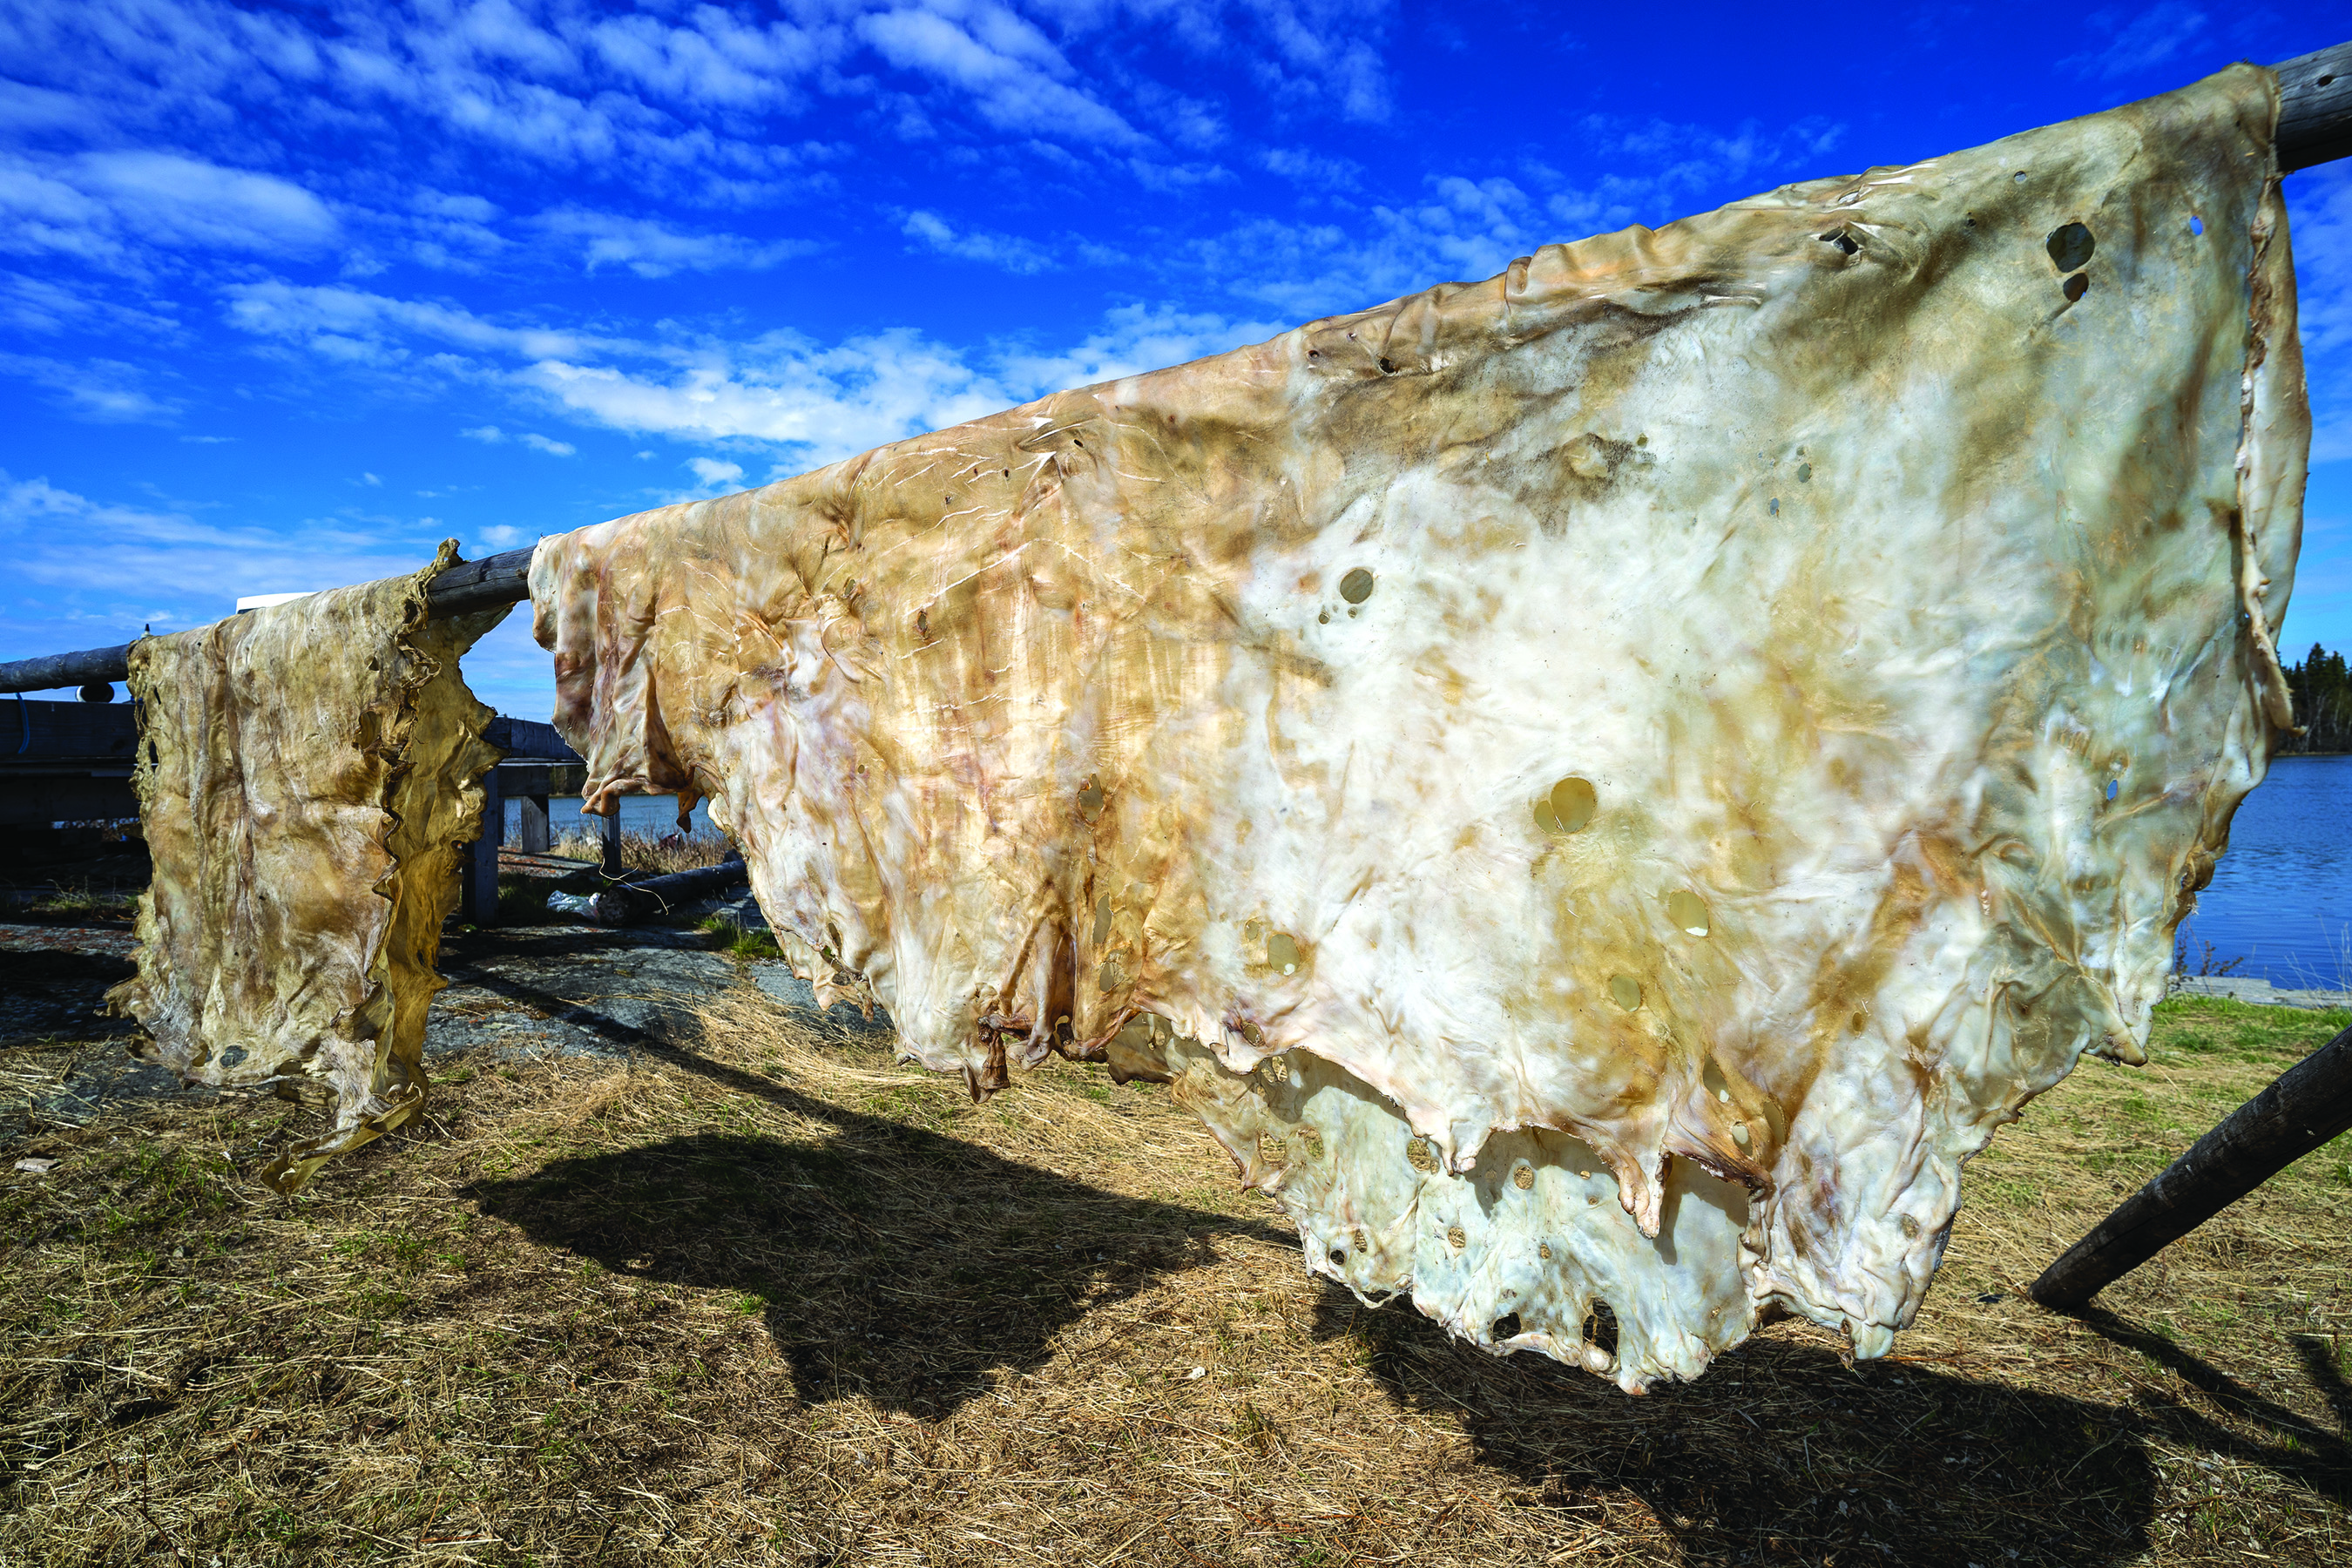 A caribou hide (left) hangs beside a much larger moose hide. (Photo: Geoff Rodriguez)